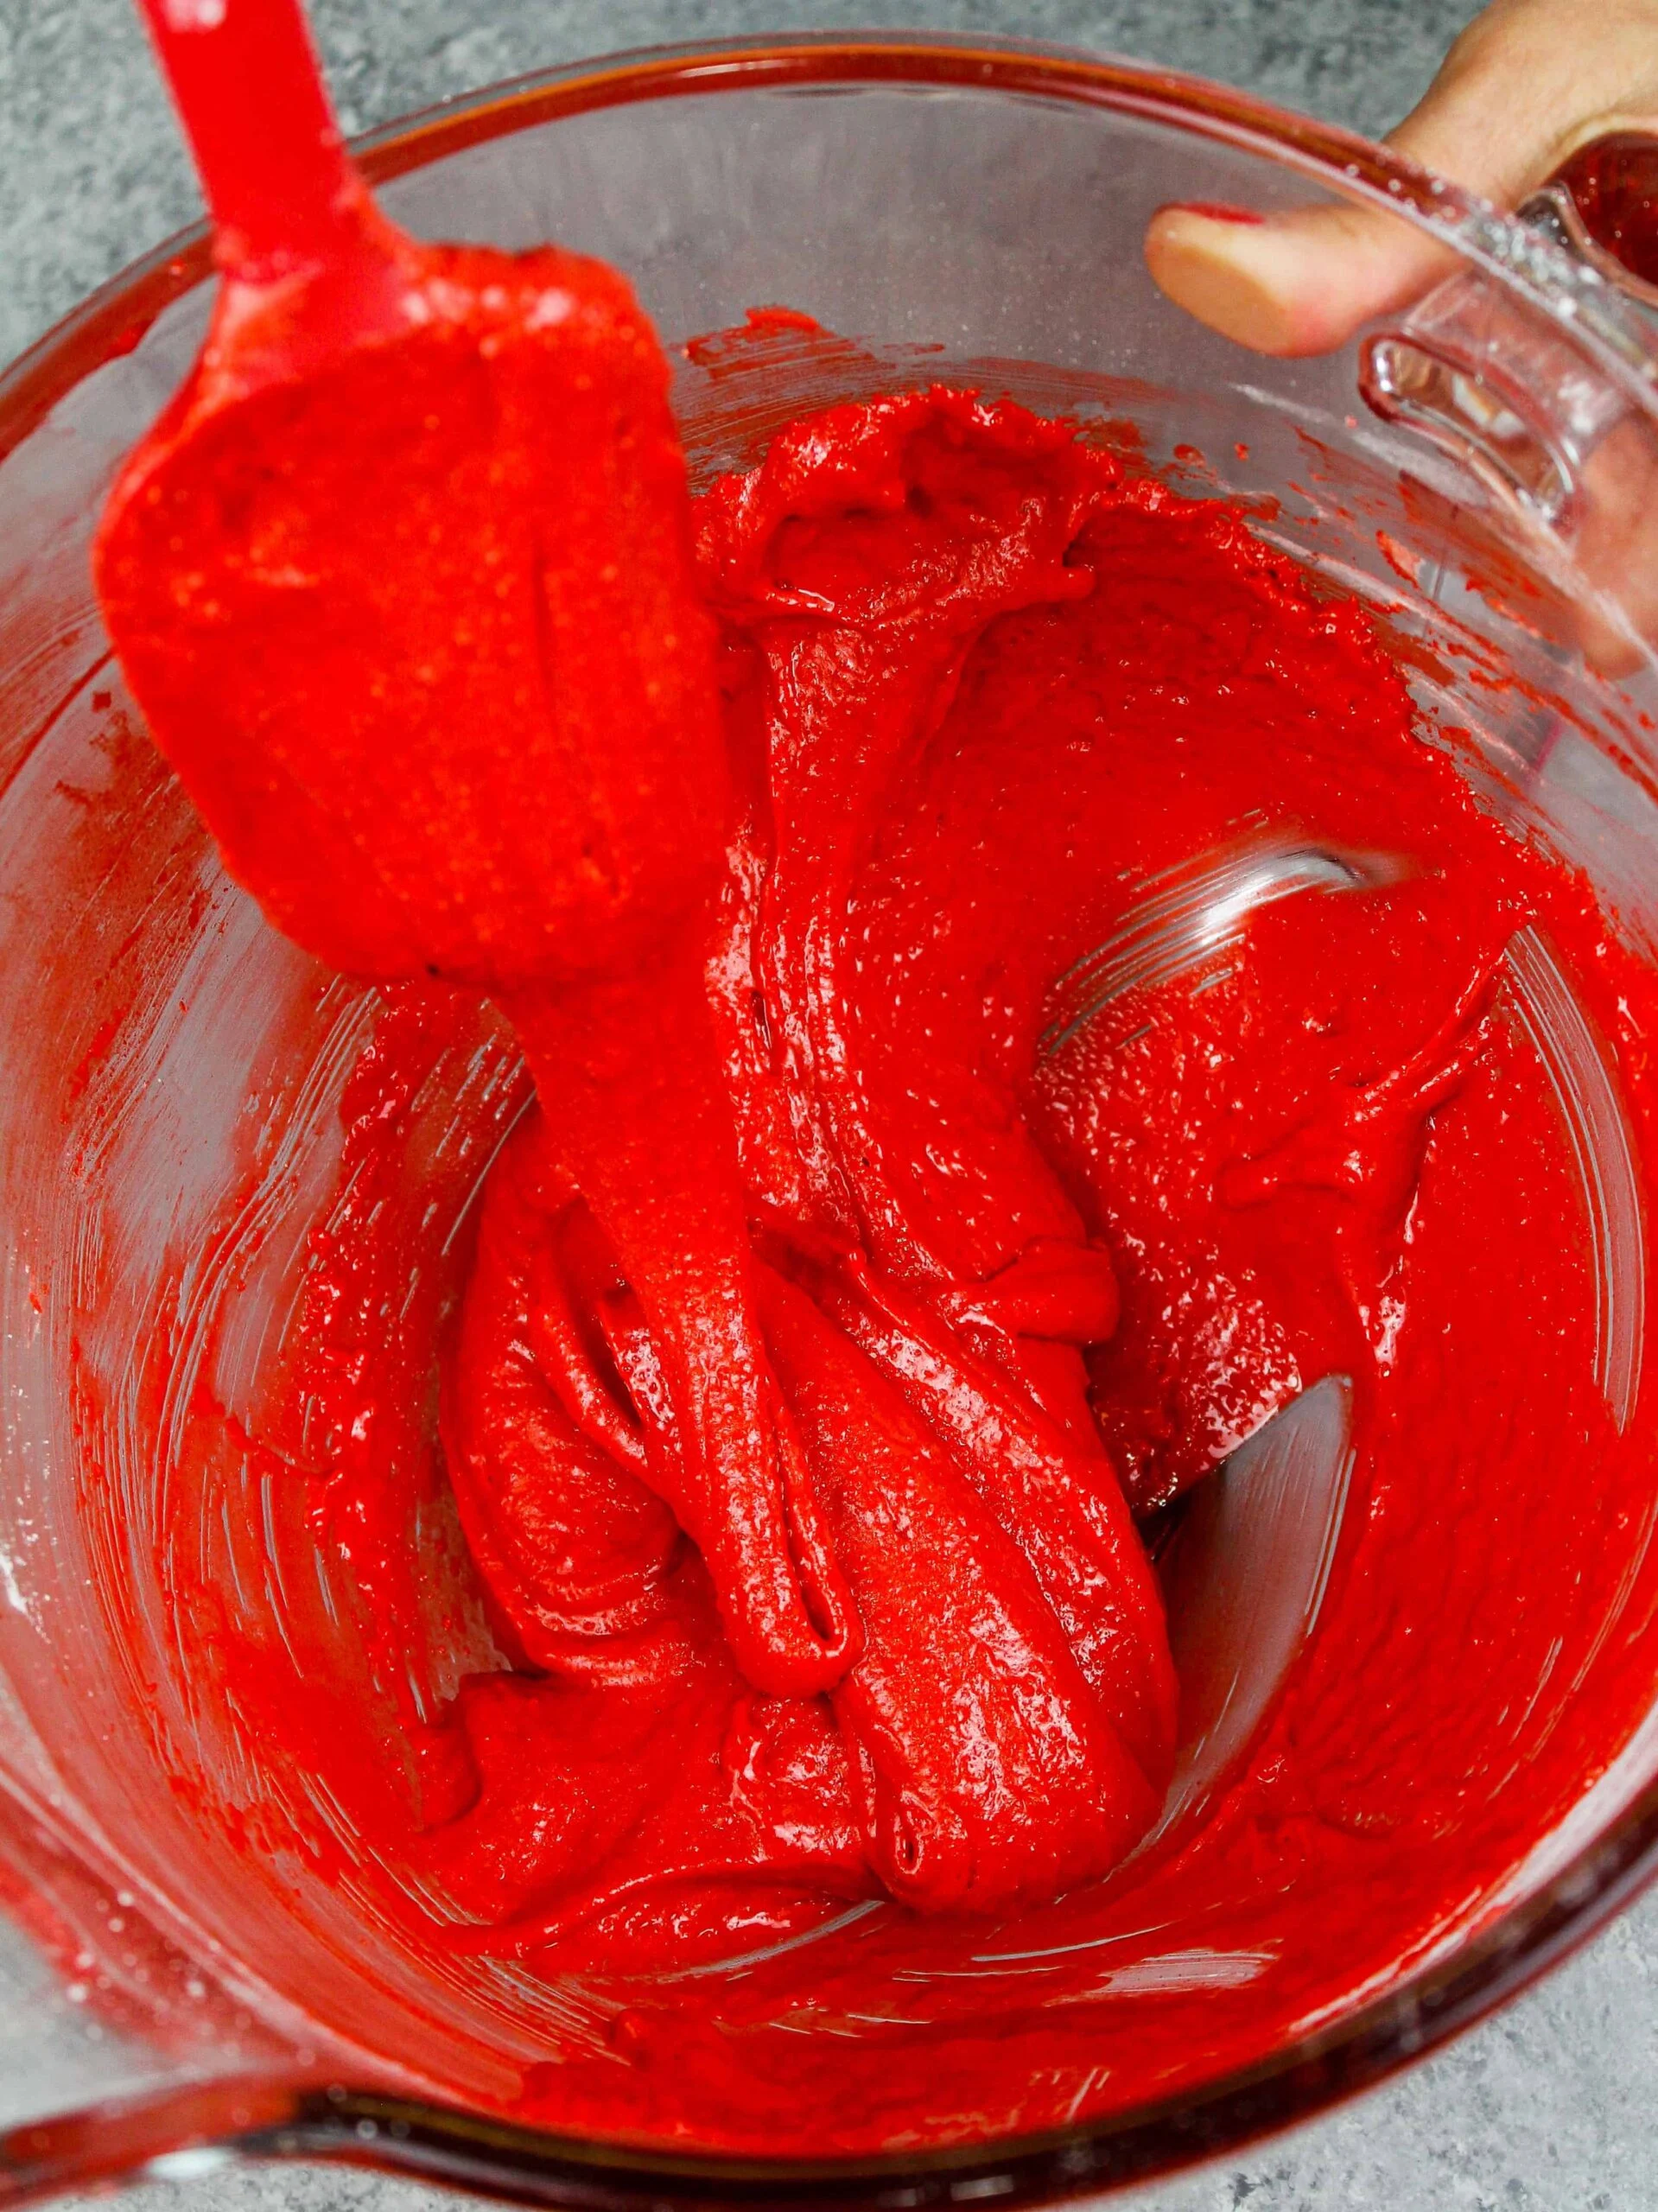 image of red velvet macaron batter that has been mixed to the perfect consistency so that it flows in thick ribbons off the spatula when lifted